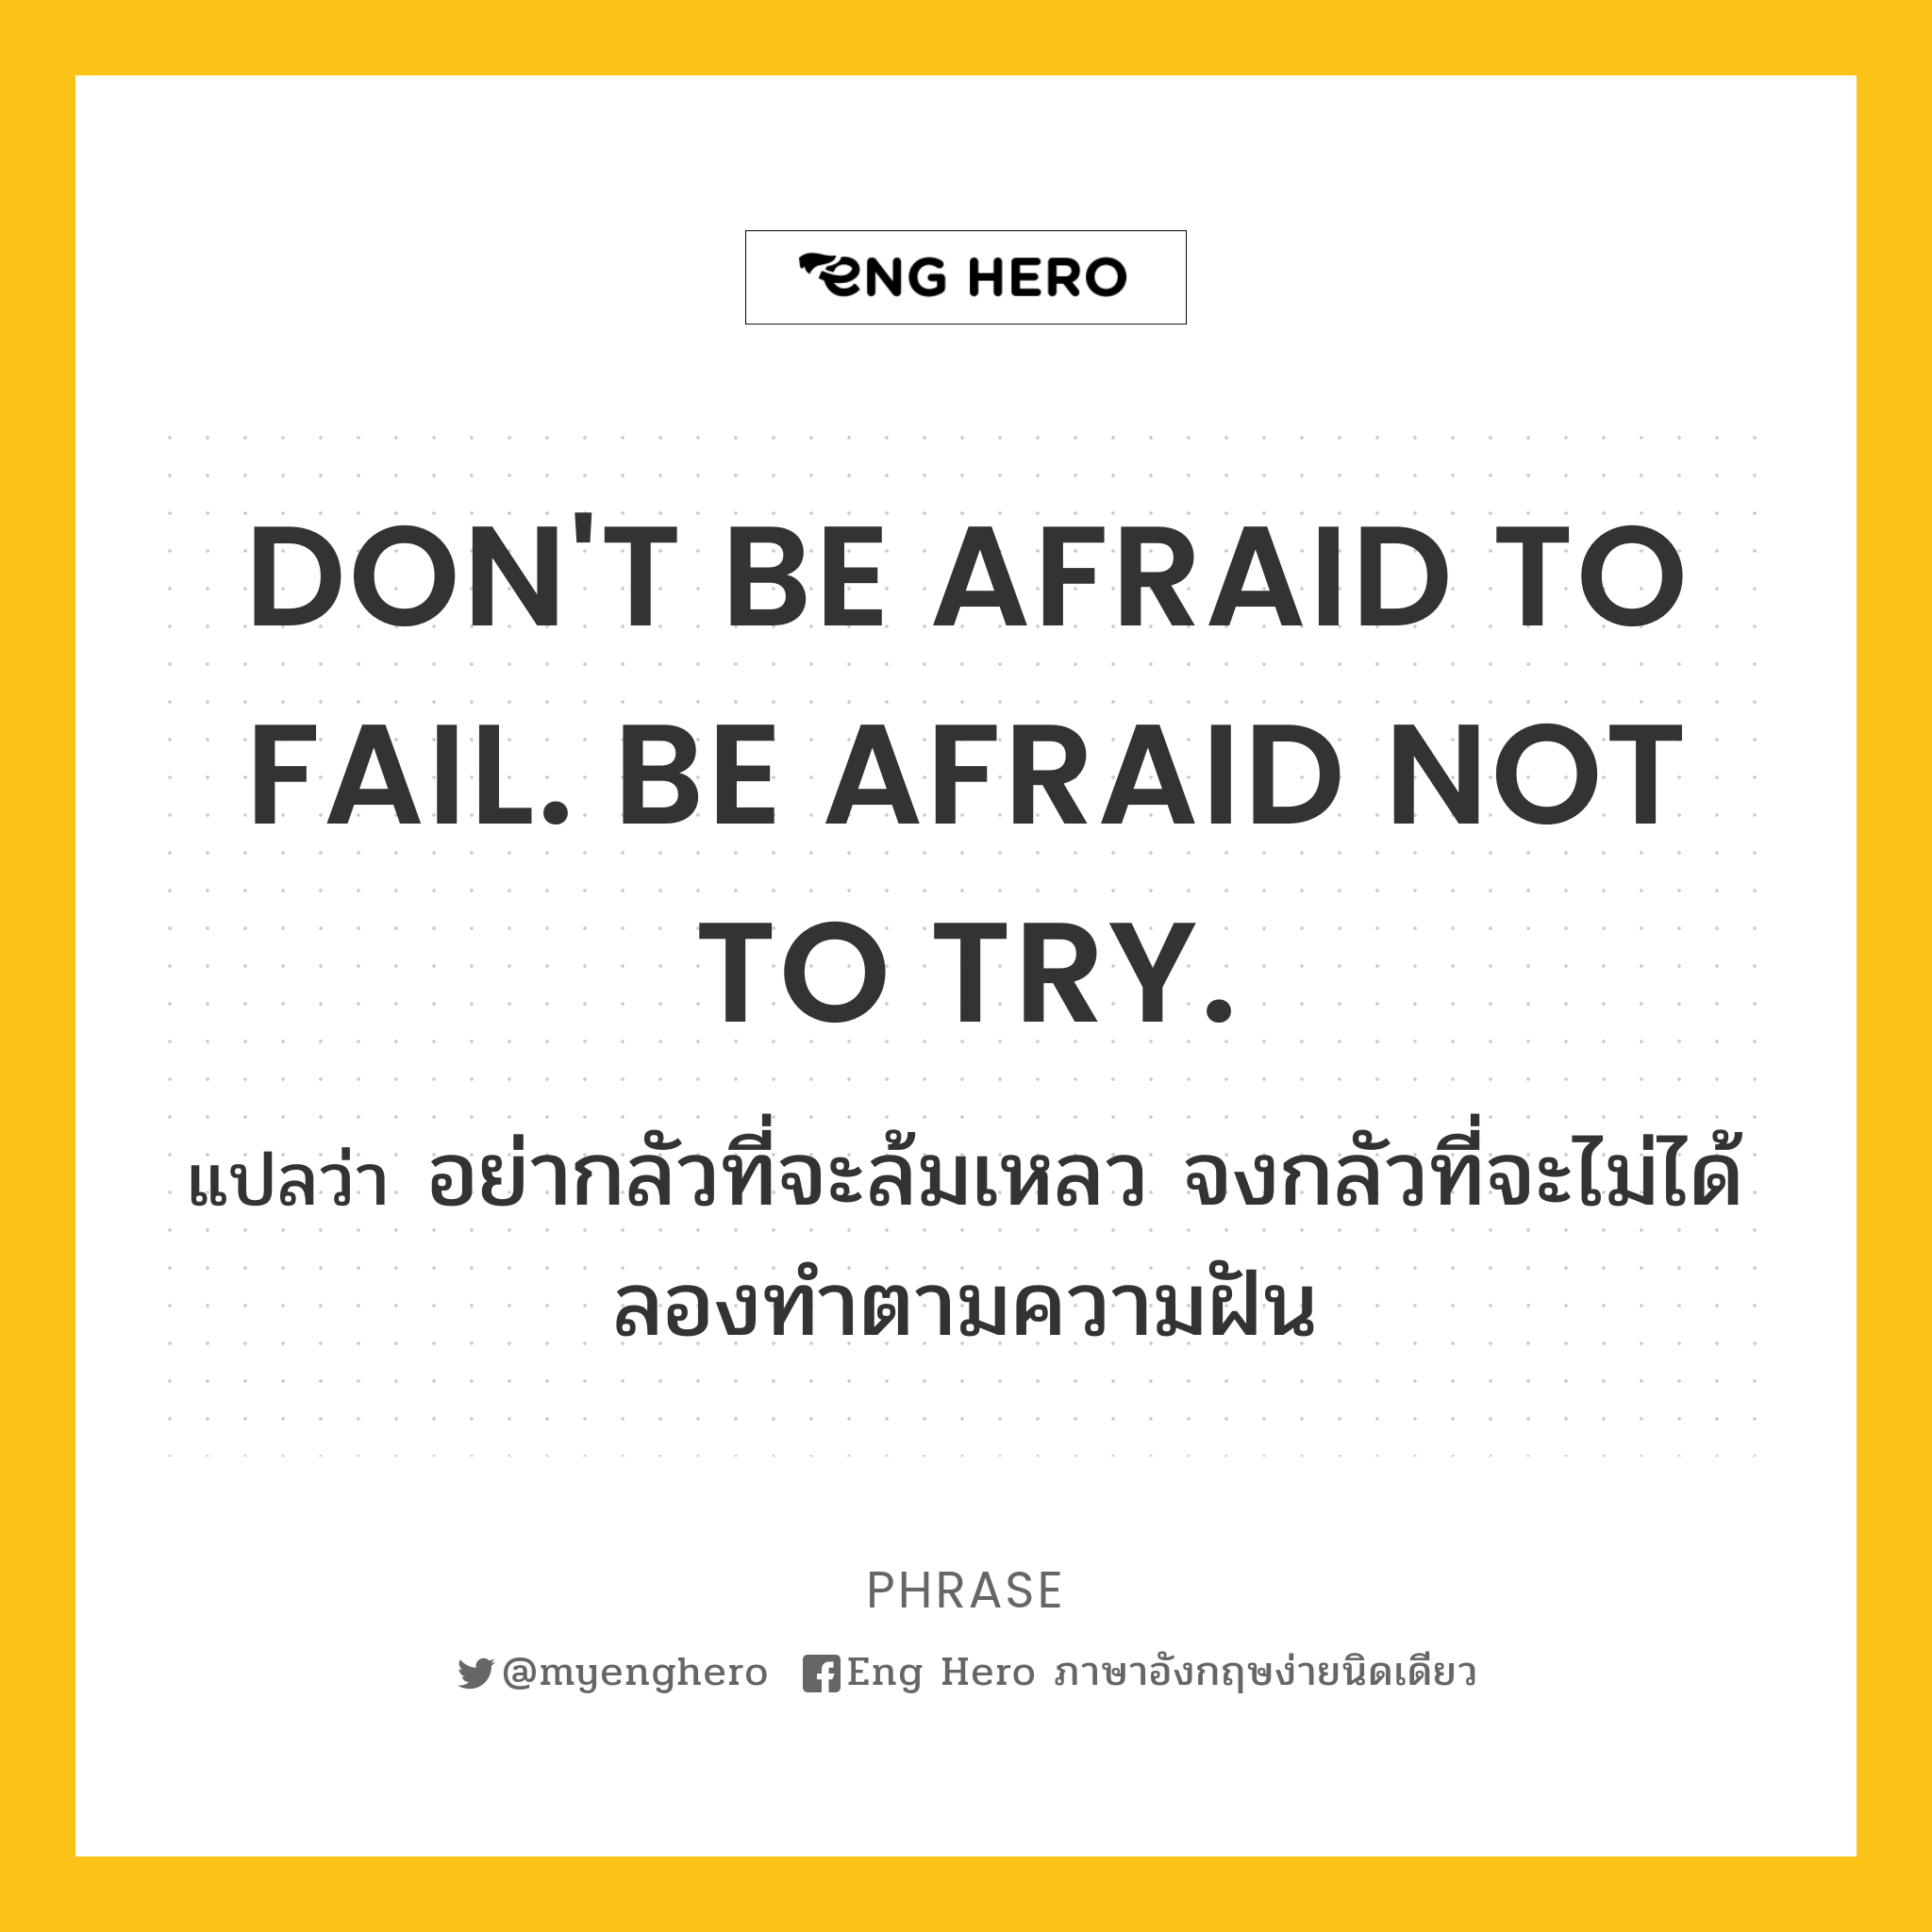 DON'T BE AFRAID TO FAIL. BE AFRAID NOT TO TRY.